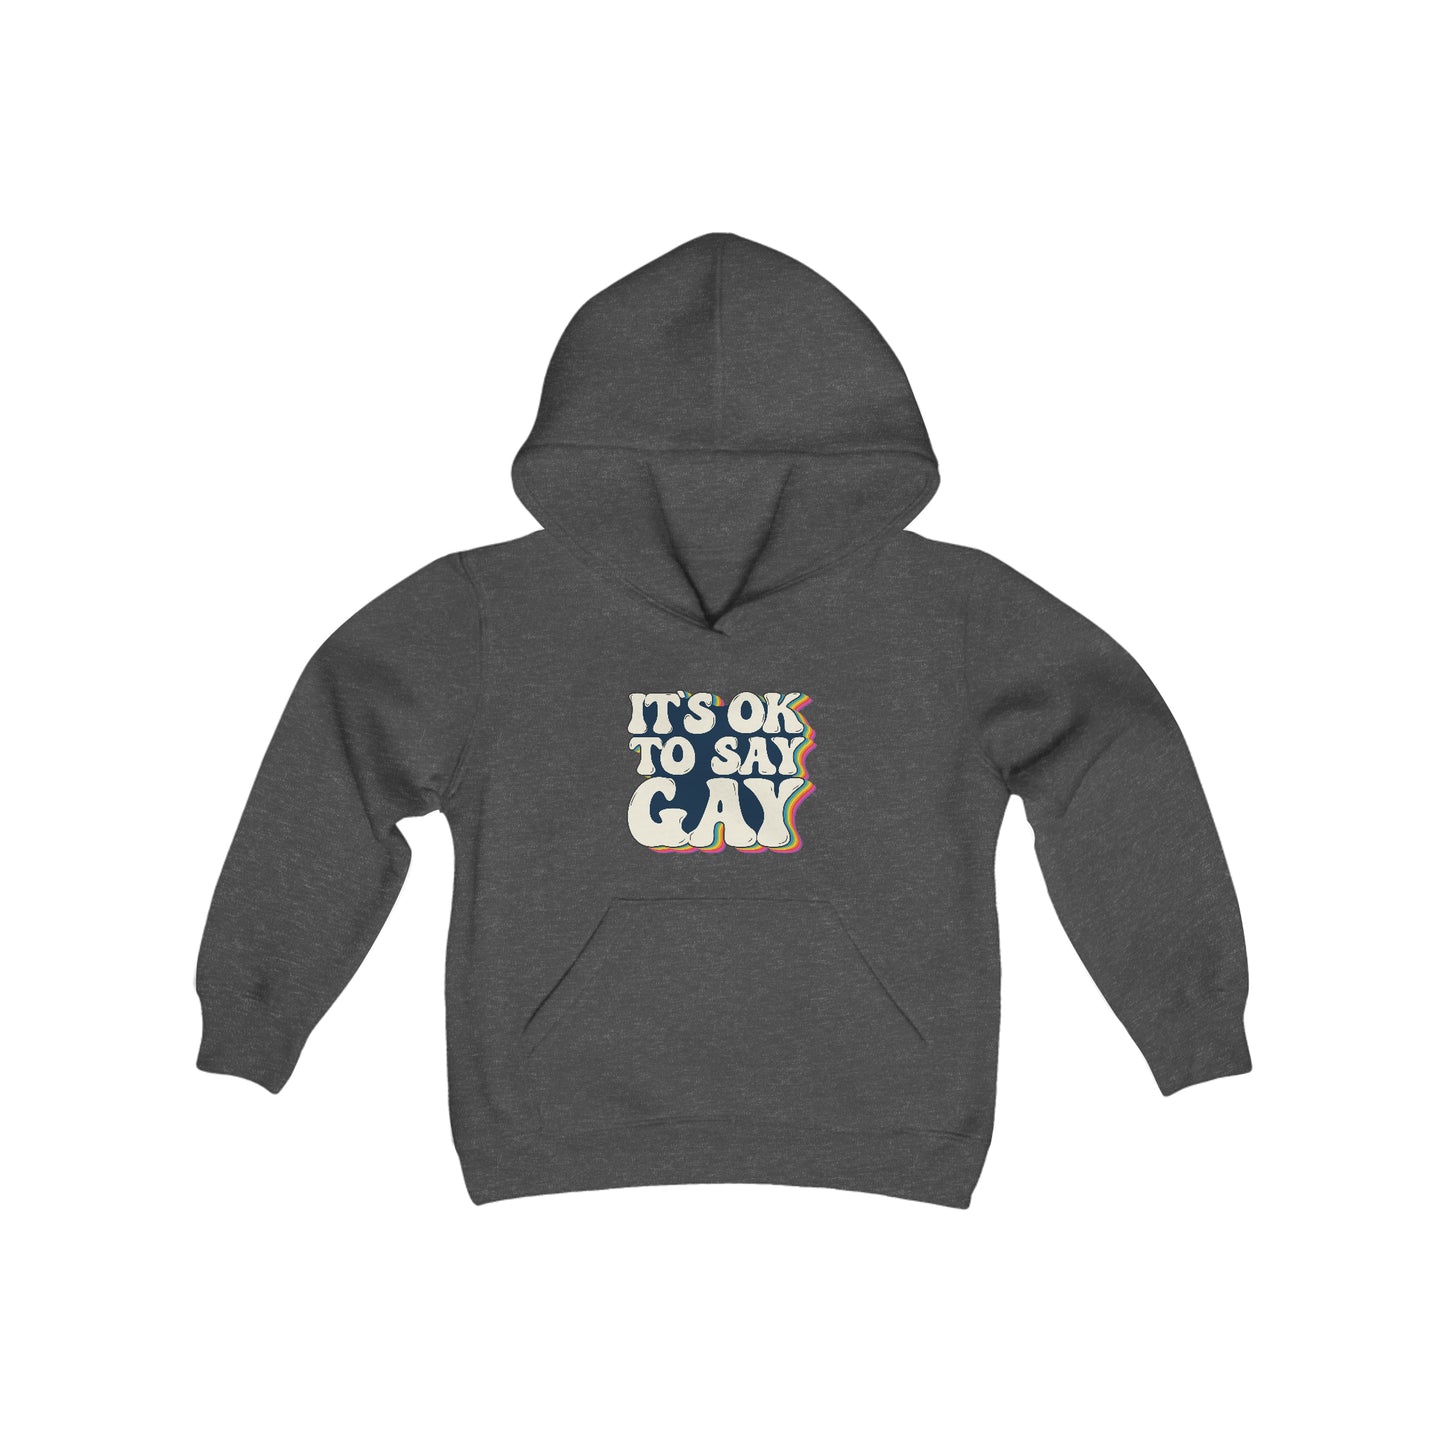 “It’s OK to Say Gay” Youth Hoodie